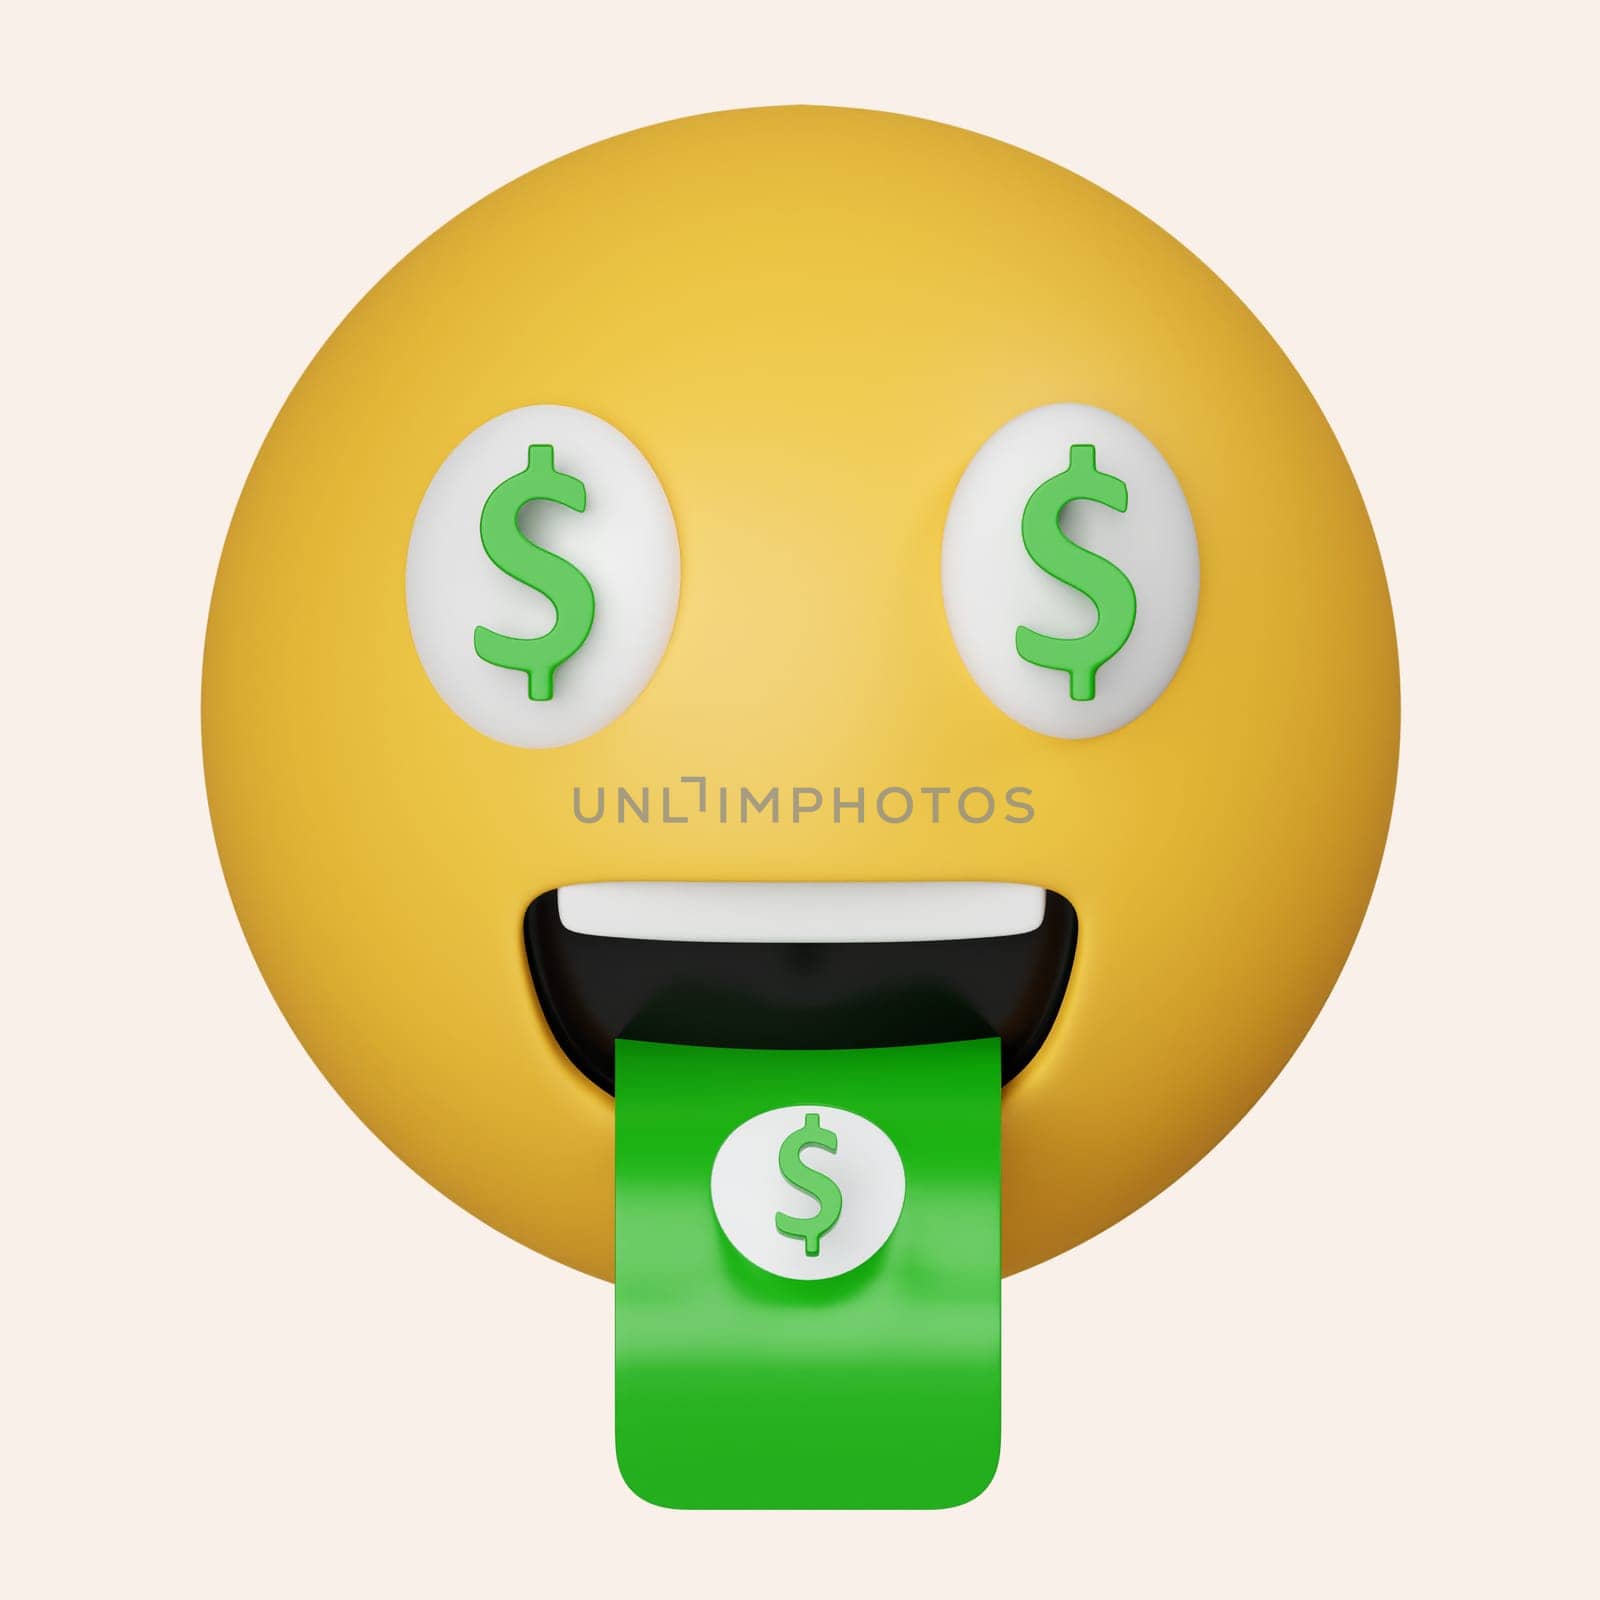 3d Rich emoji. Money Cash Dollar Face Emoji. icon isolated on gray background. 3d rendering illustration. Clipping path..